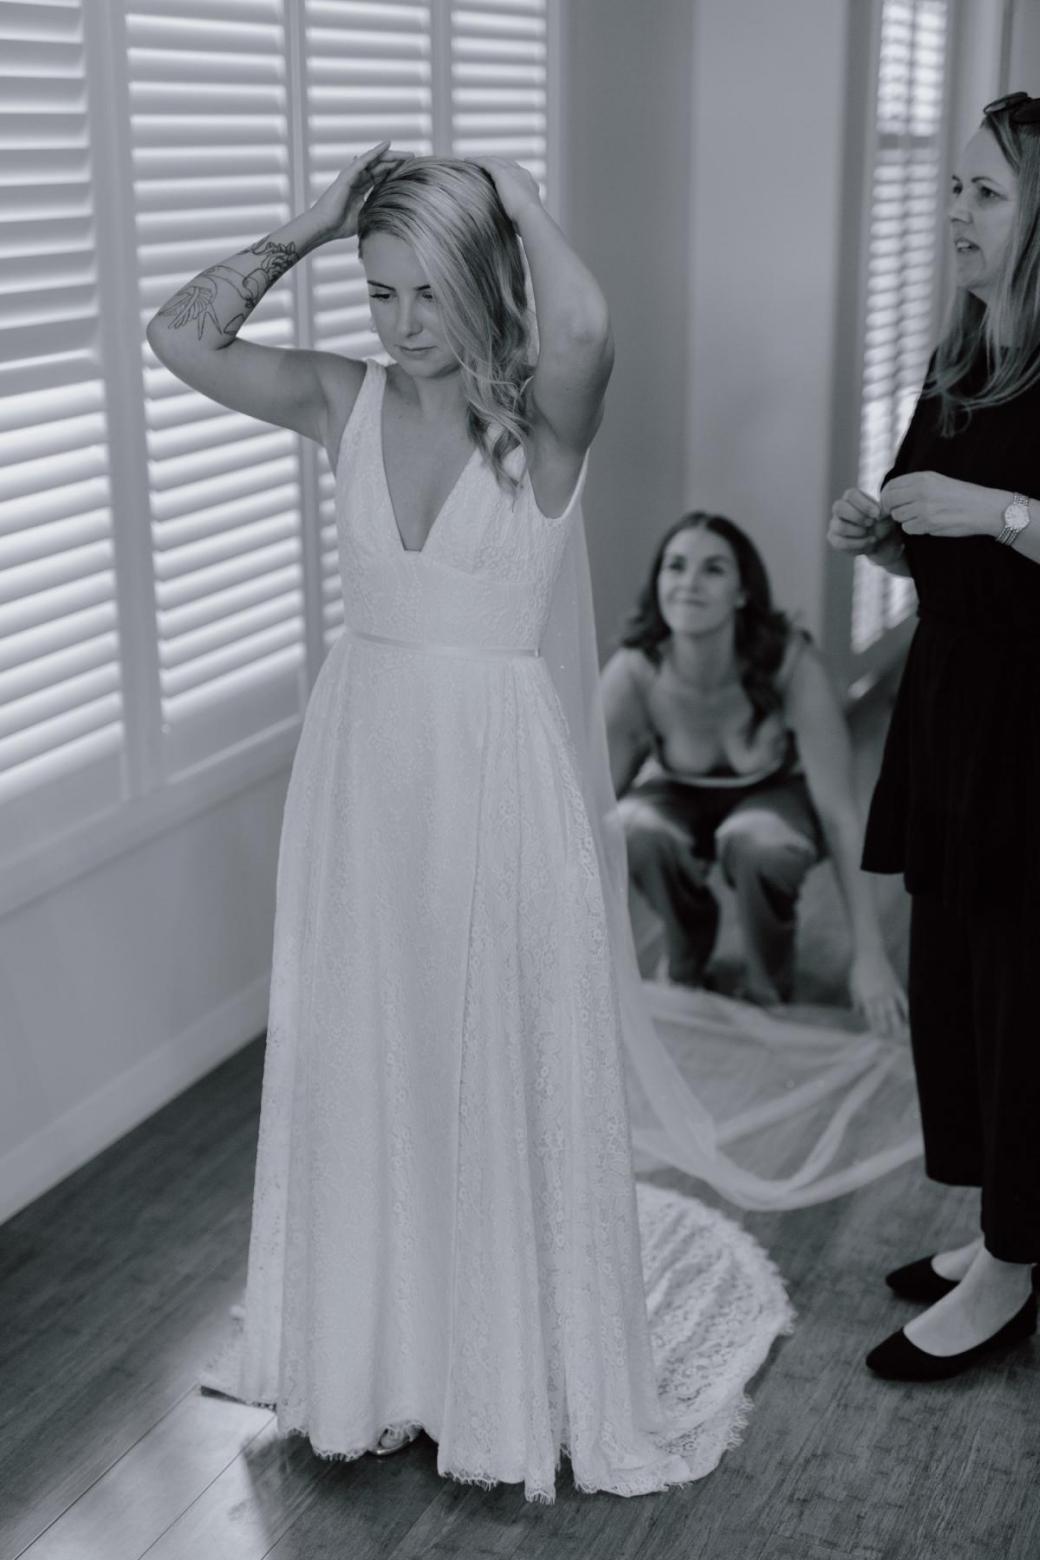 Karen Willis Holmes bride Megan getting ready with bridesmaids for romantic wedding, wearing the Nadia gown; an edgy and romantic lace wedding dress with a V-neck and side split.